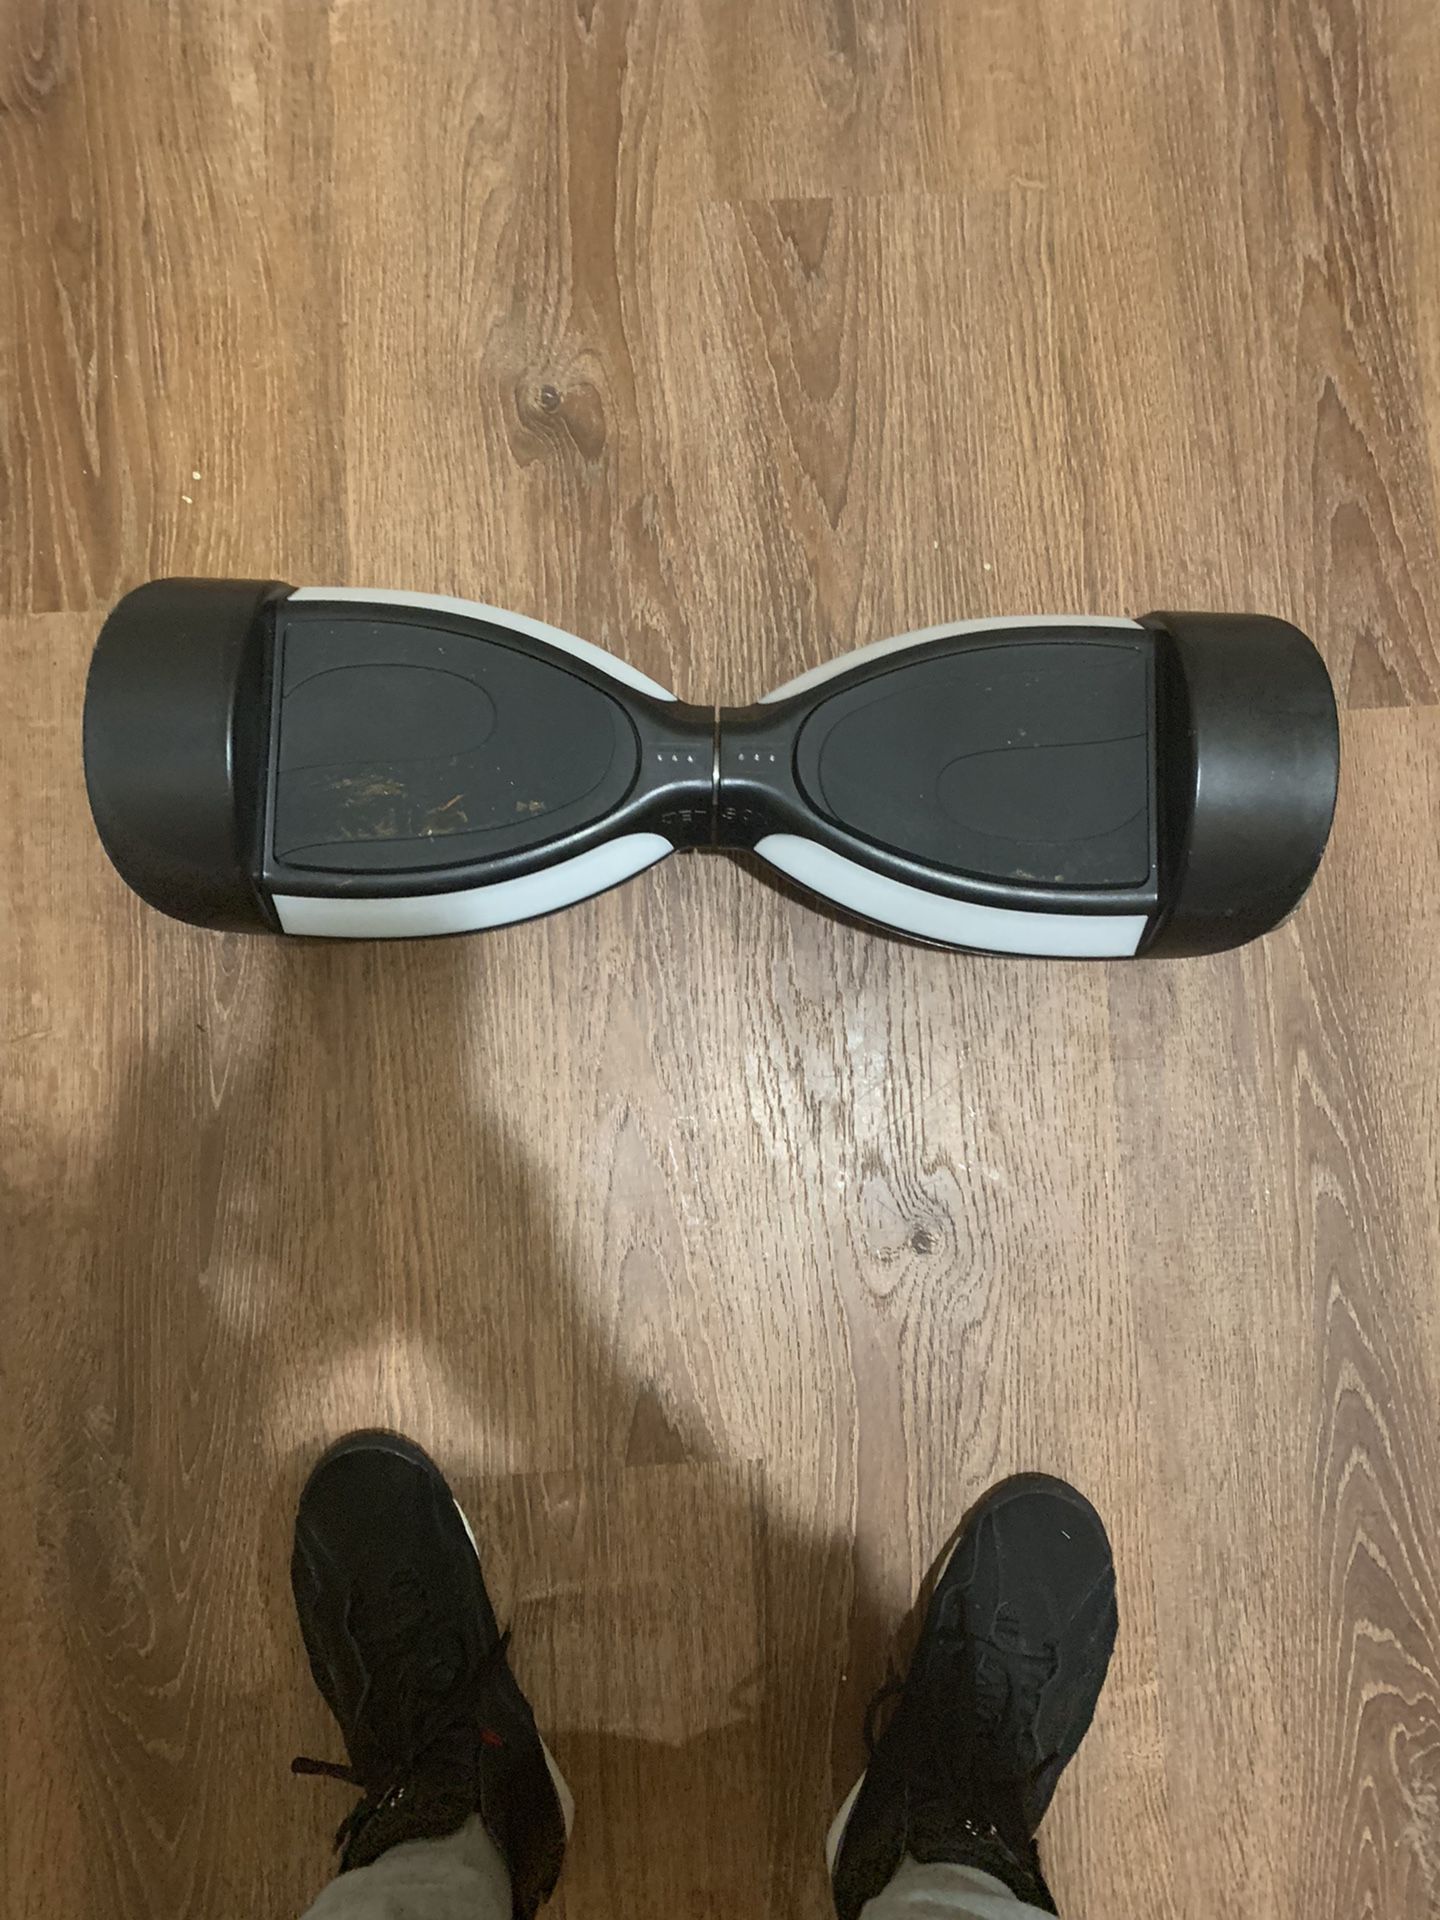 Jetson Impact (HoverBoard)